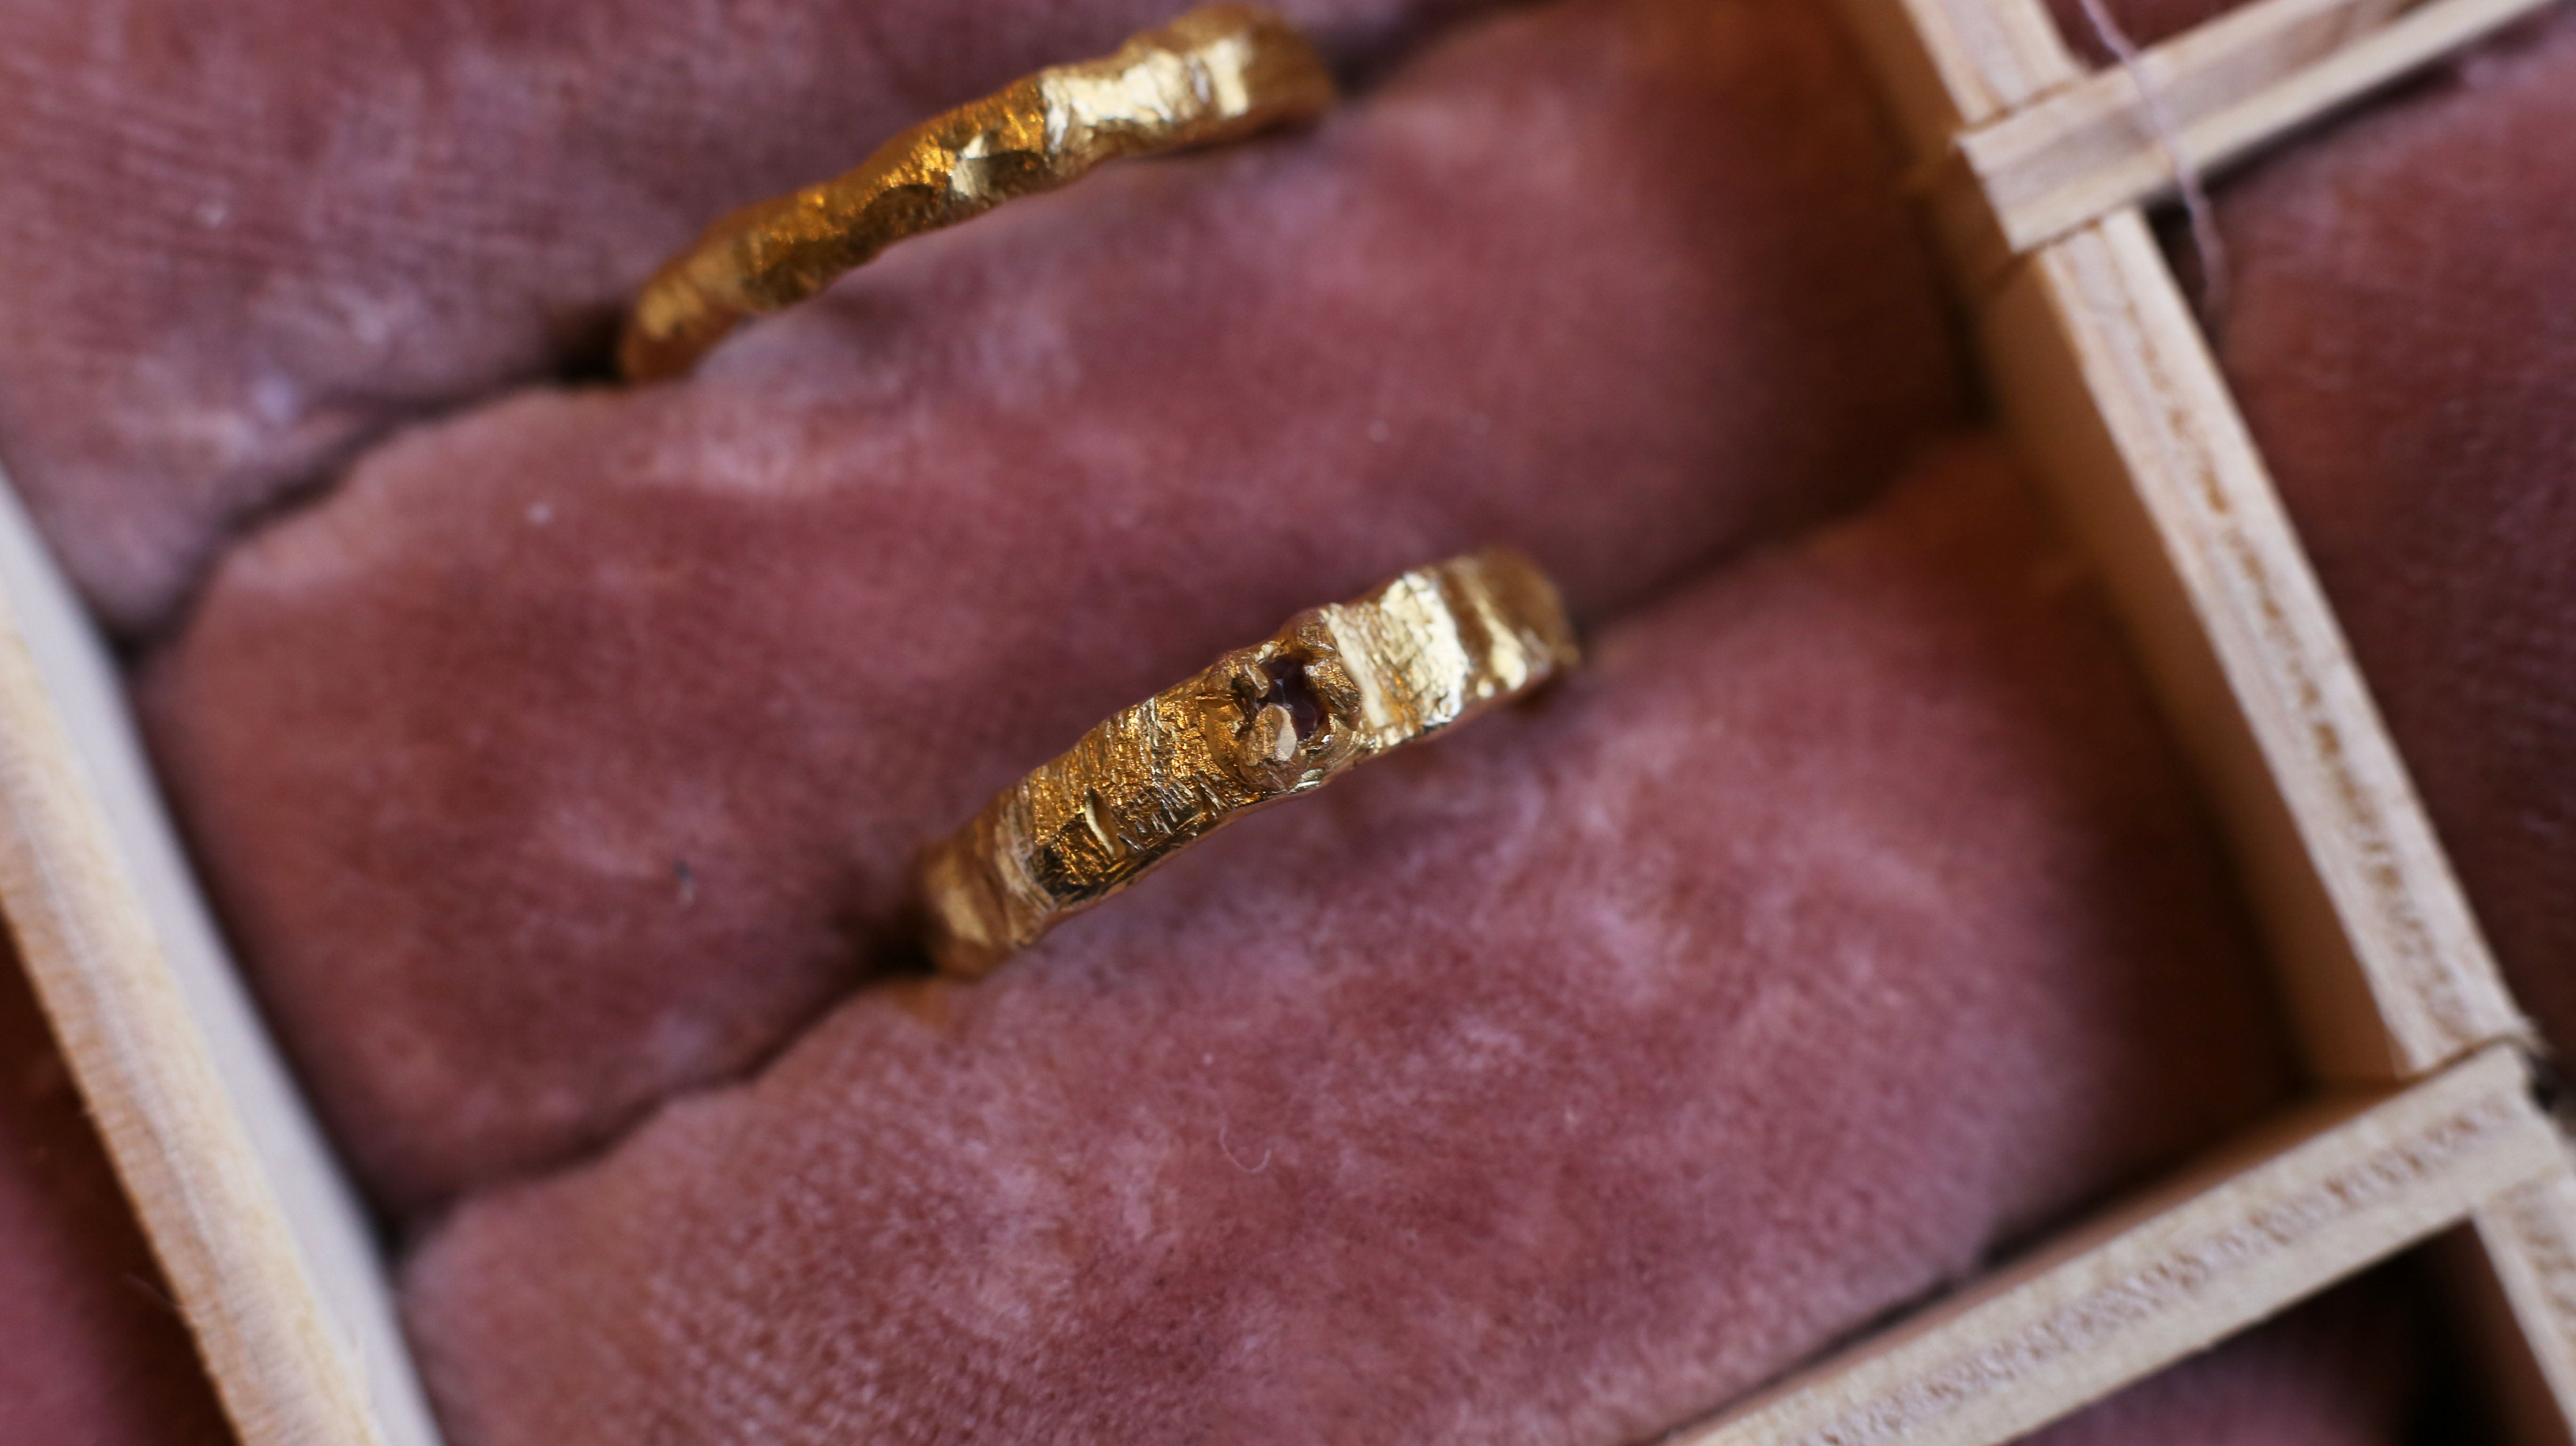 Gold Plated sterling silver ring, set with a pink tourmaline in an organic finish band